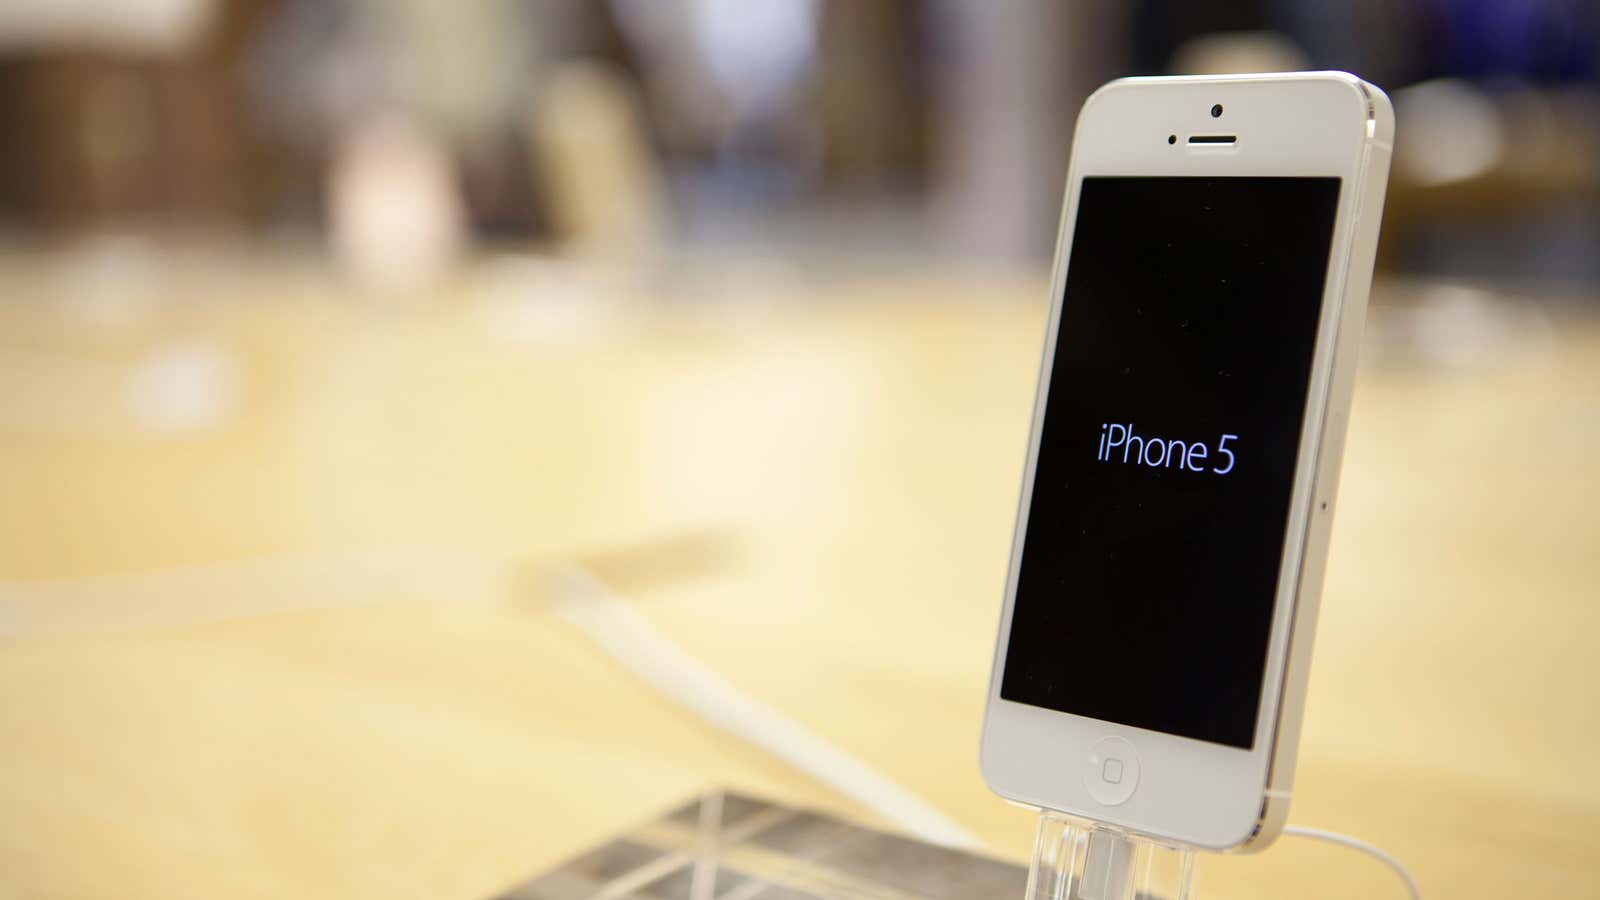 US retailers got a bump from the iPhone 5 launch last month.